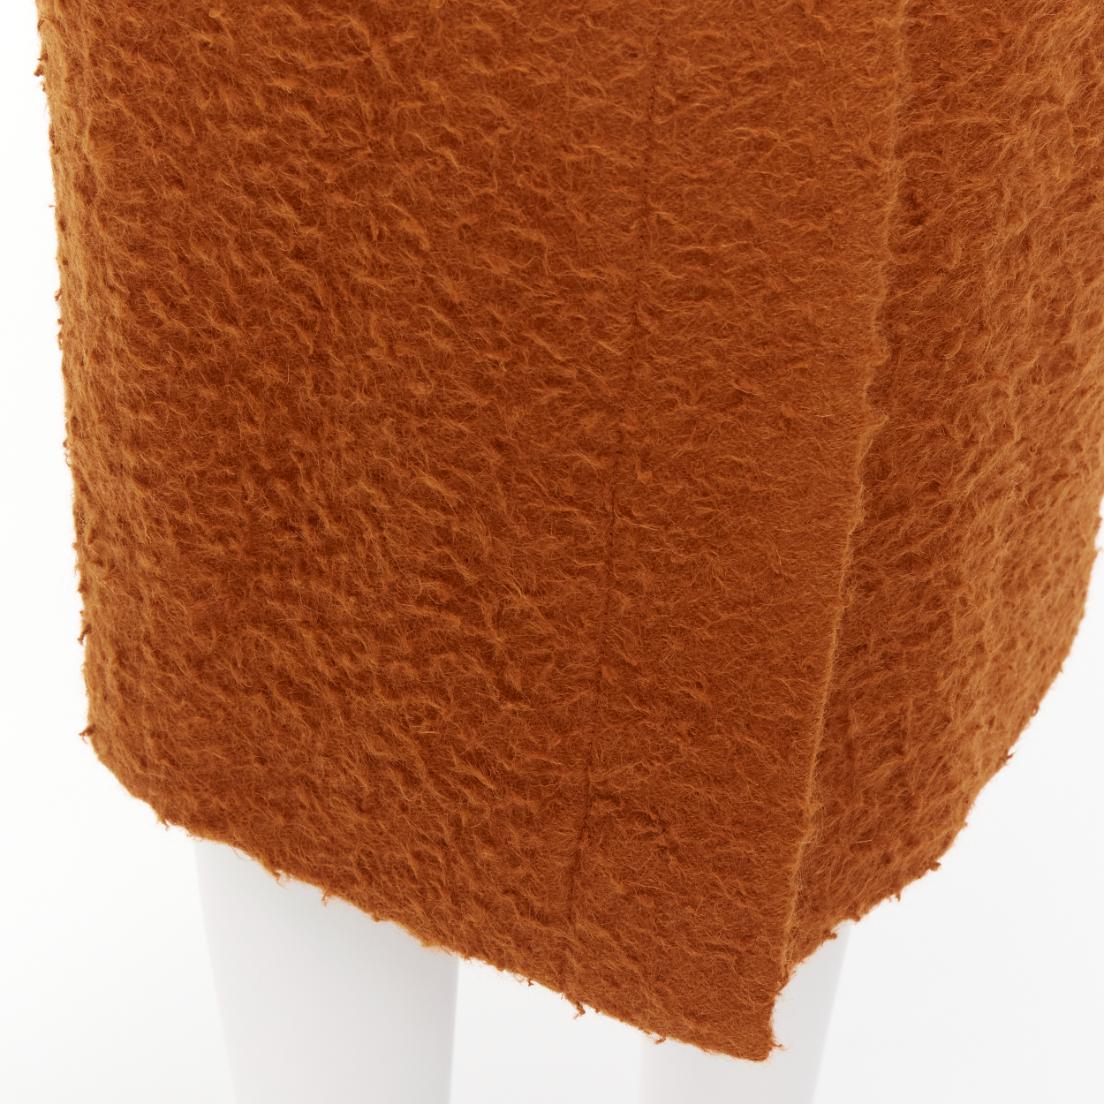 MARNI brown textured alpaca silk pocketed front slit pencil skirt IT38 XS
Reference: CELG/A00429
Brand: Marni
Material: Alpaca, Silk
Color: Brown
Pattern: Solid
Closure: Zip Fly
Lining: Black Fabric
Made in: Italy

CONDITION:
Condition: Excellent,